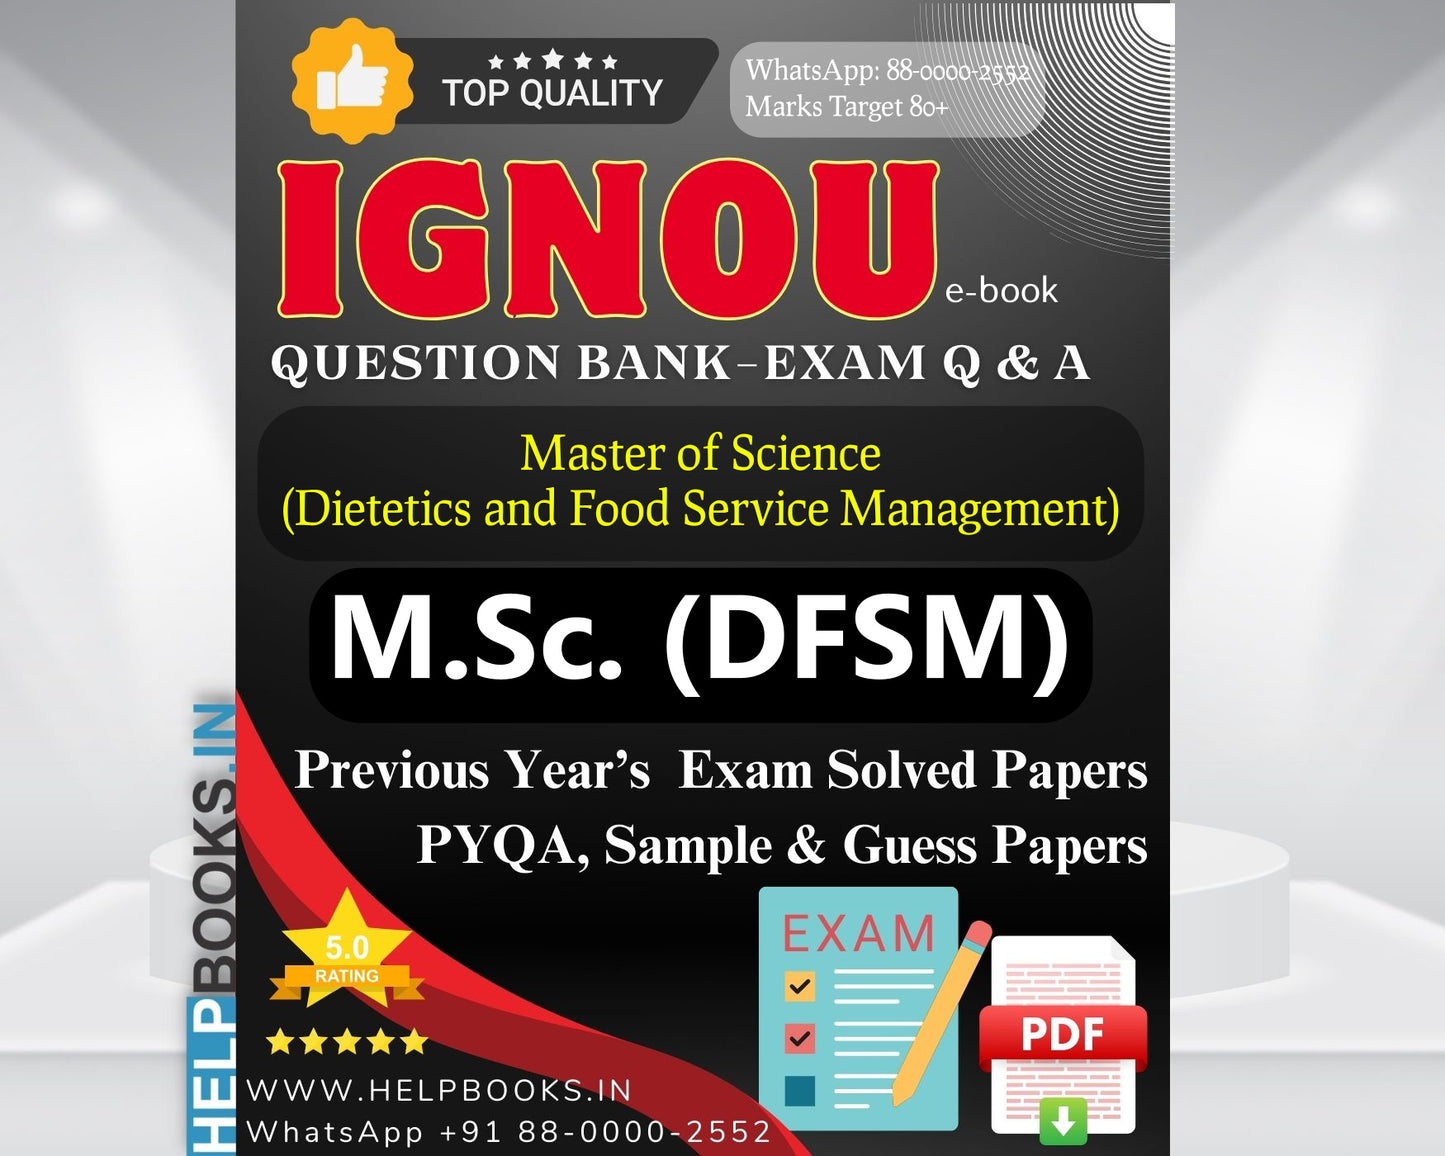 MSCDFSM IGNOU Exam Combo of 10 Solved Papers: 5 Previous Years' Solved Papers & 5 Sample Guess Papers for Master of Science Food Nutrition